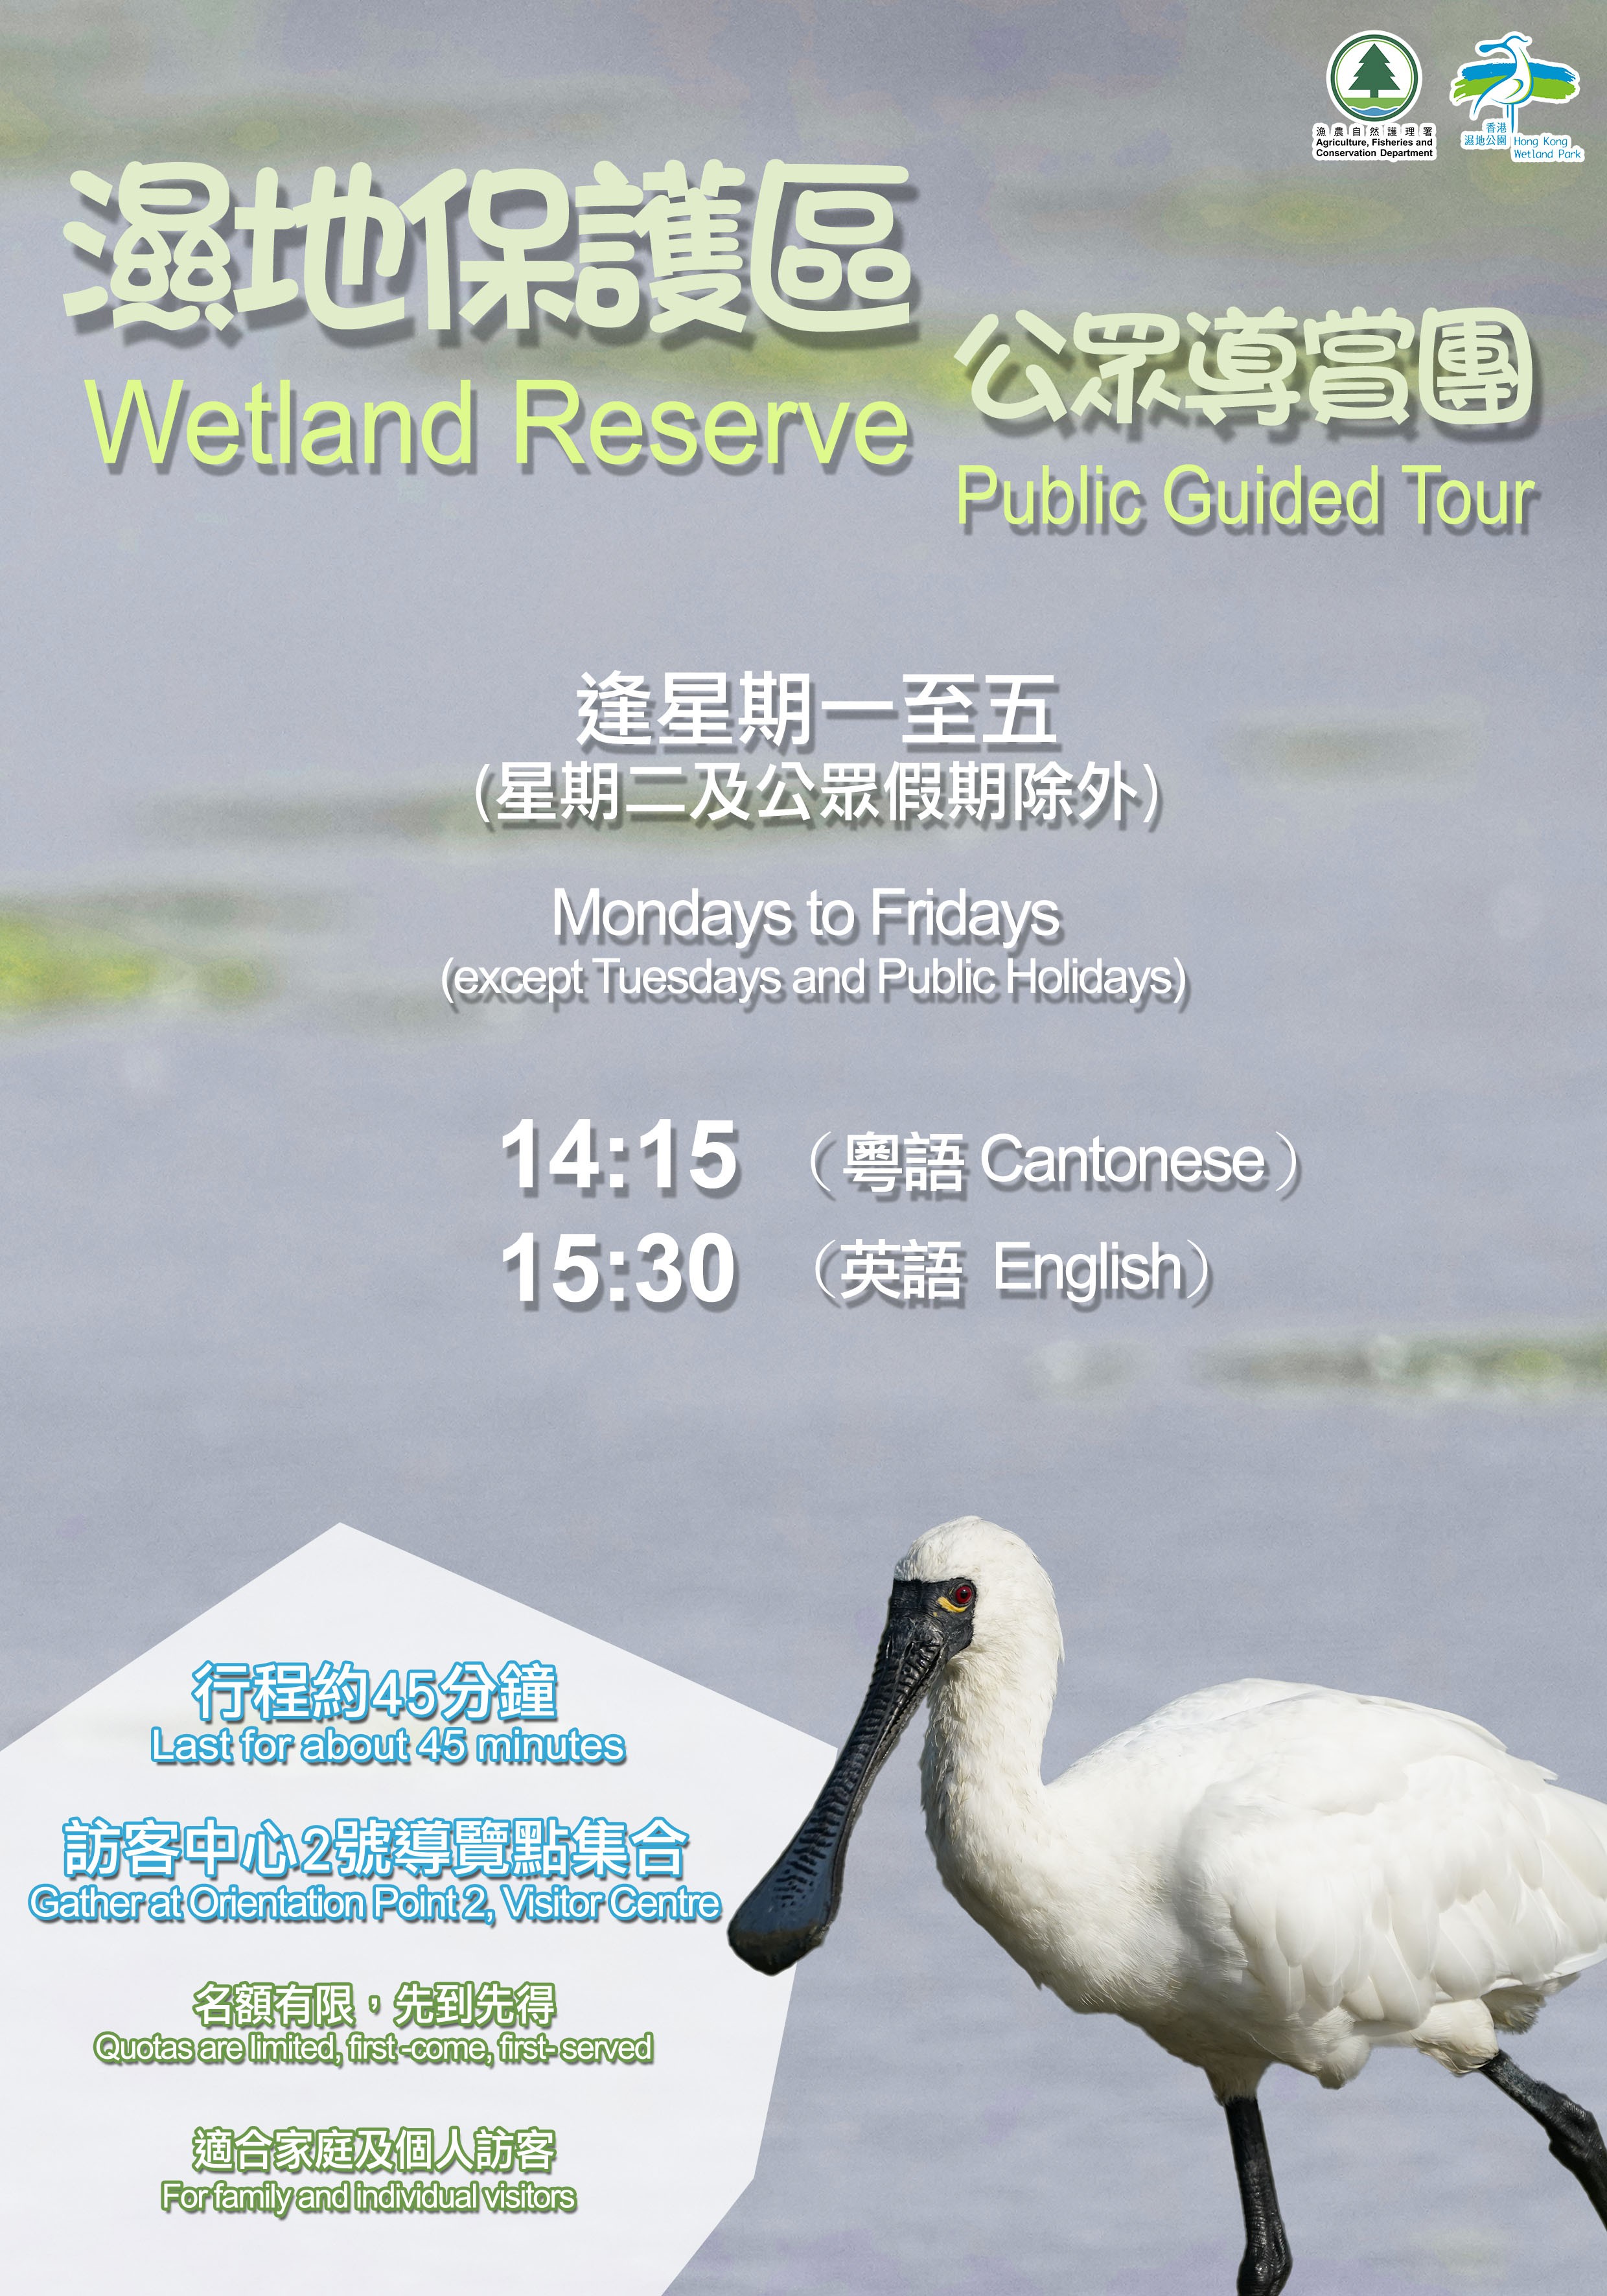 “Wetland Reserve” Public Guided Tour (Weekdays)